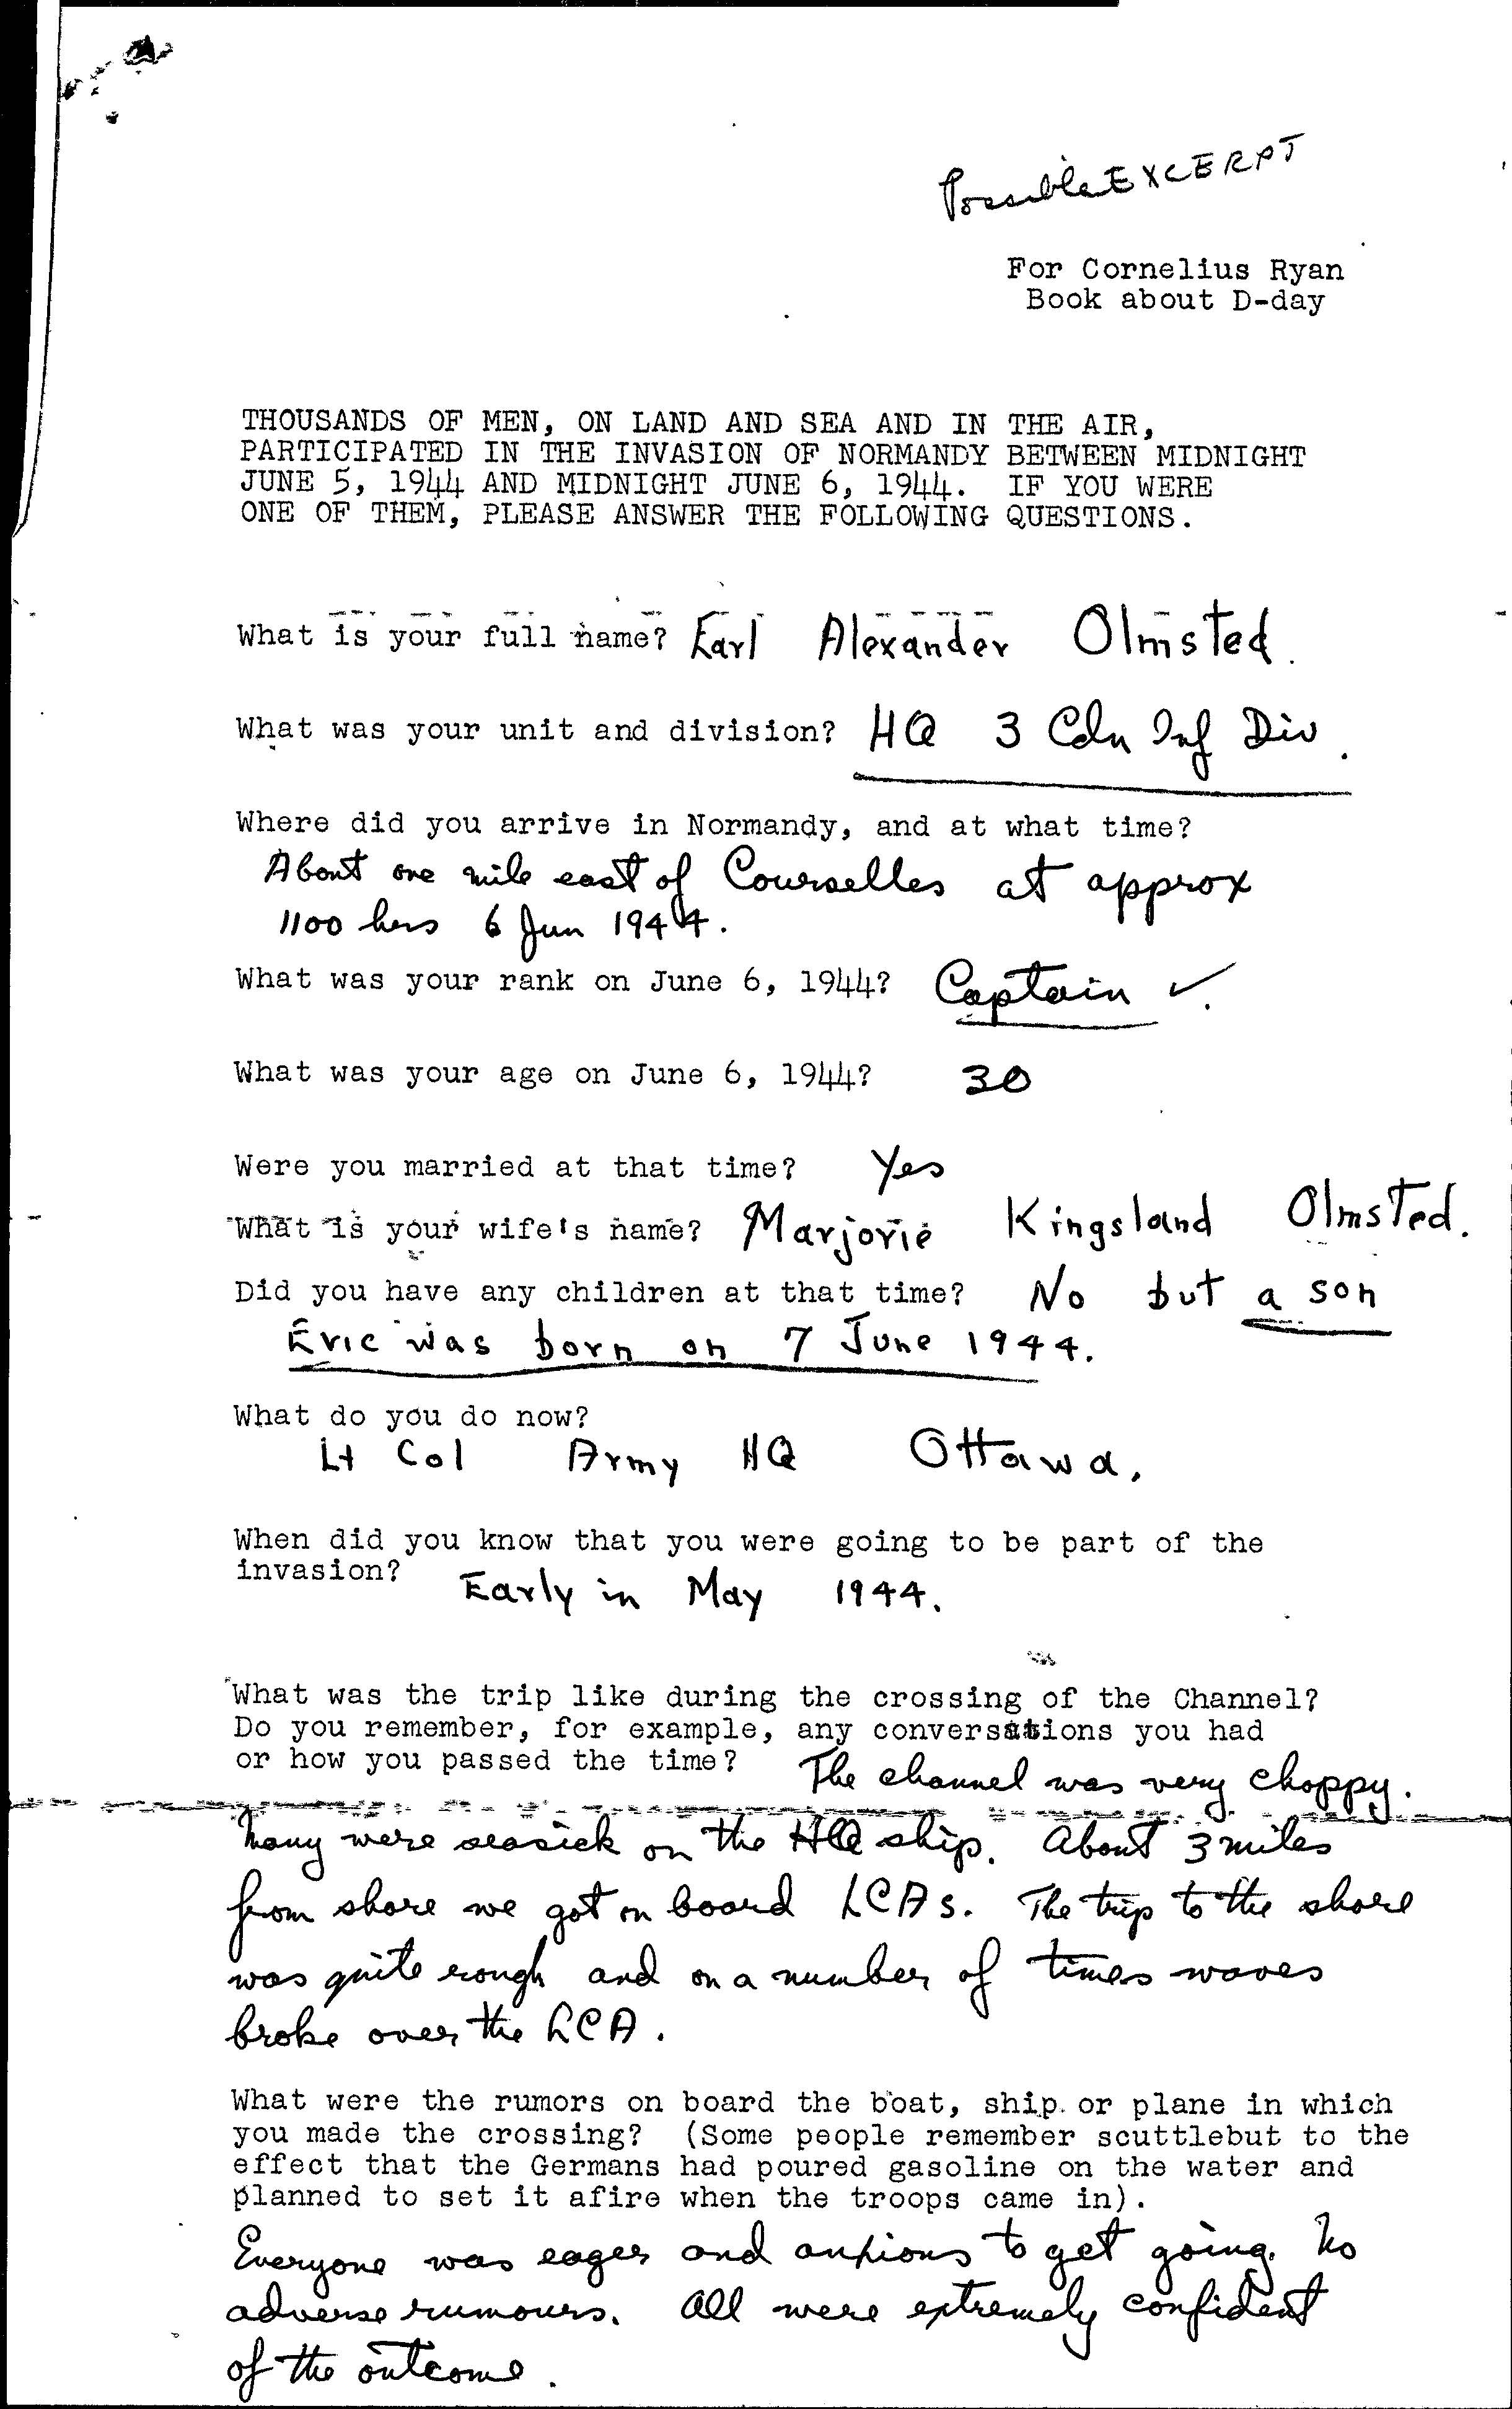 E. A. Olmsted D-Day Account (The Longest Day Submission)_Page_1.jpg